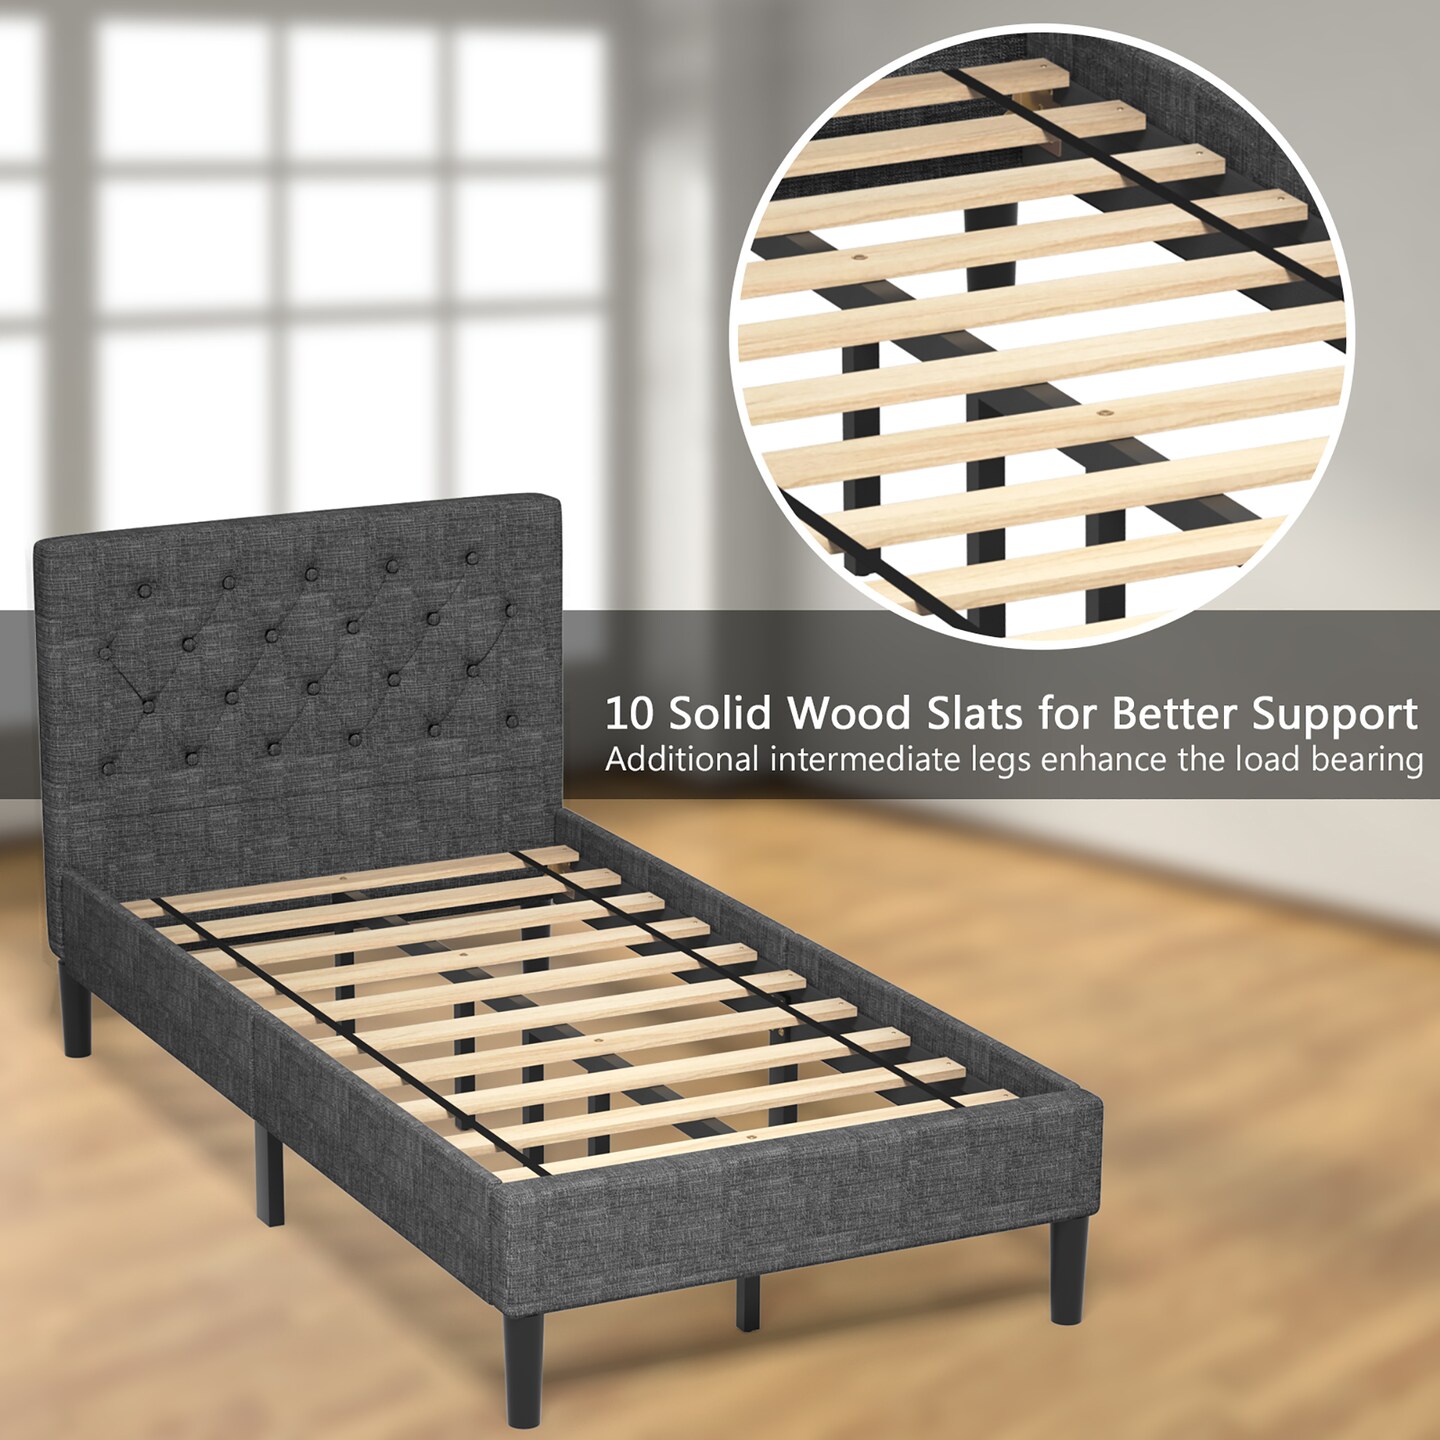 Costway Twin Upholstered Bed Frame Diamond Stitched Headboard Wood Slat Support